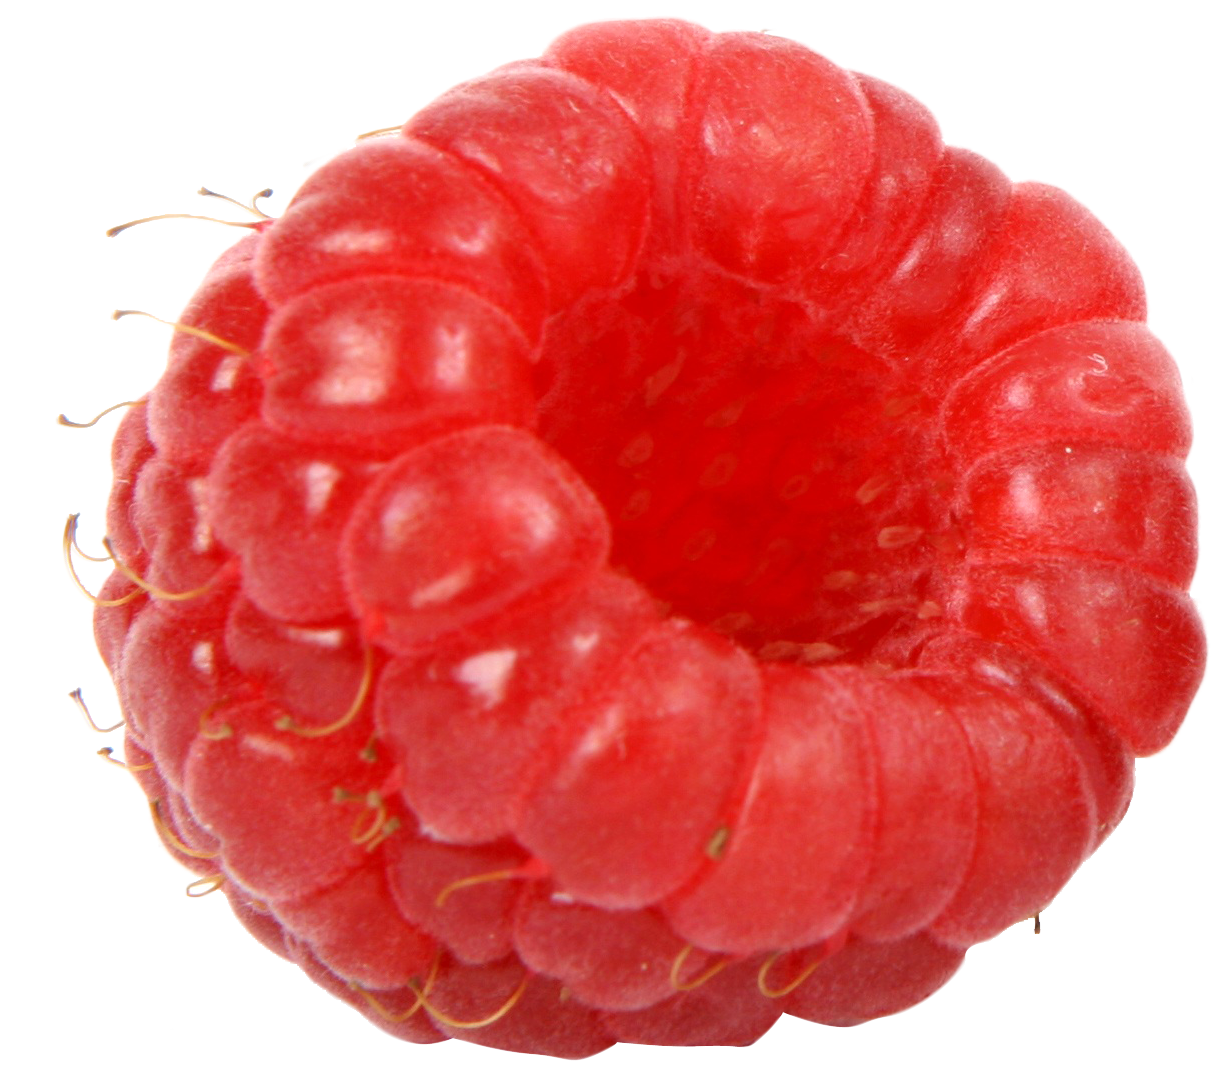 Rraspberry Png Image PNG Imag